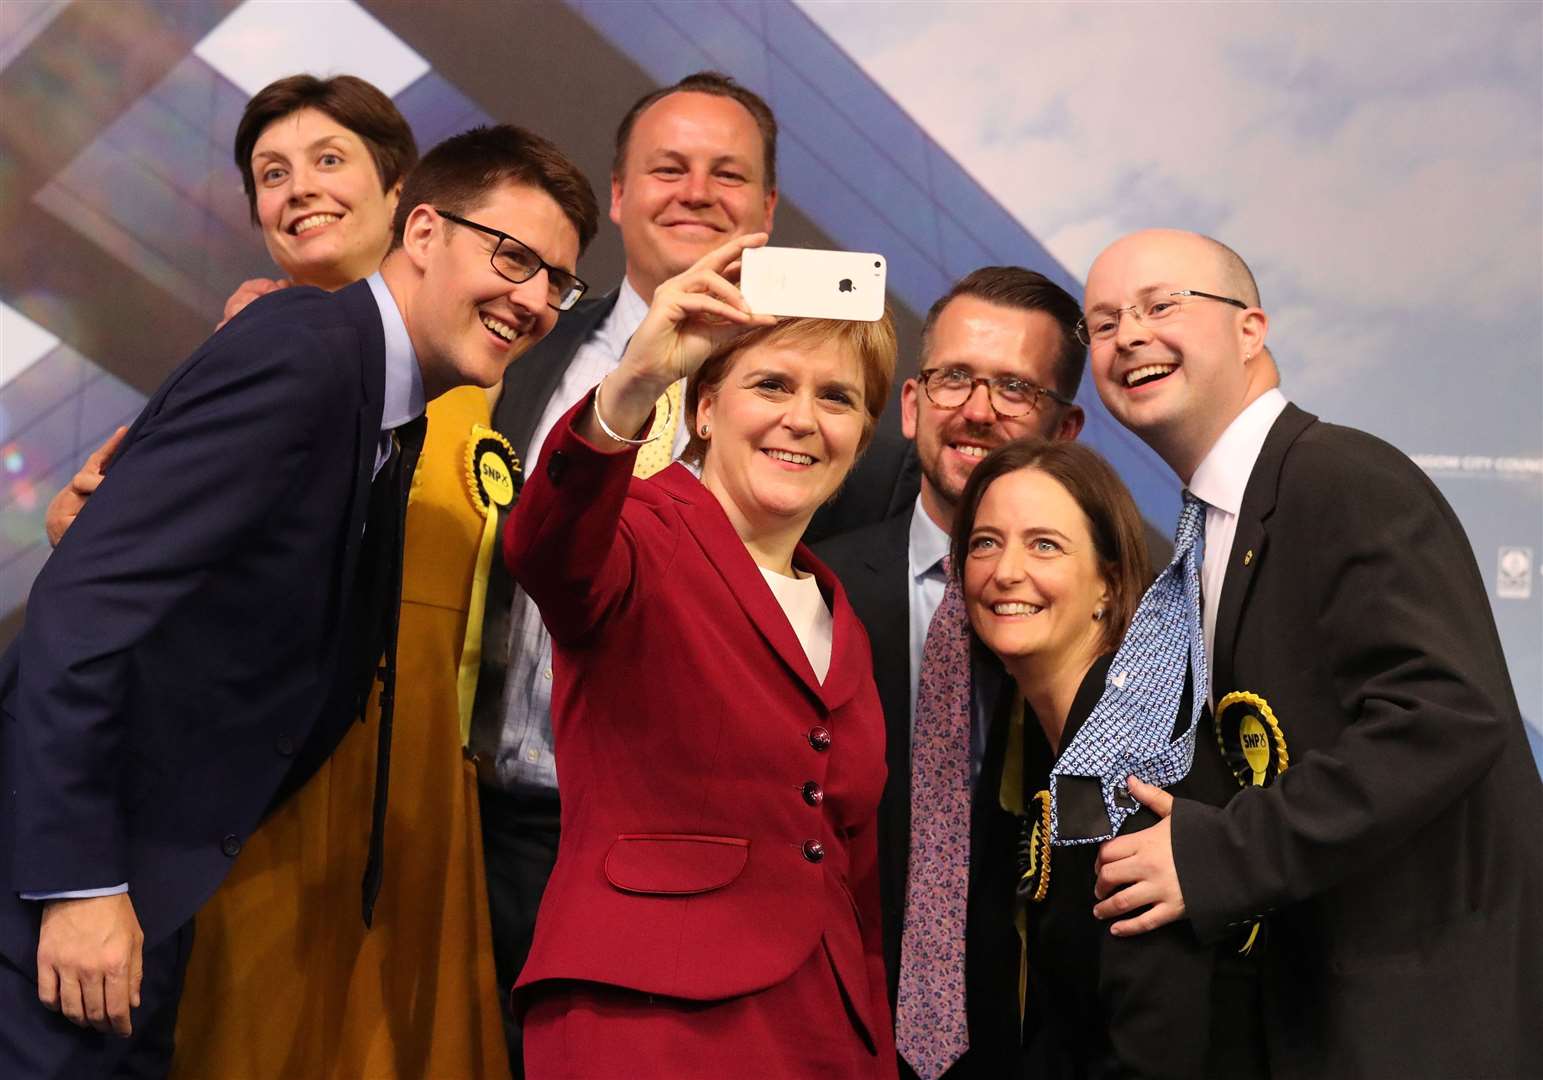 Patrick Grady (far right) with SNP colleagues including Nicola Sturgeon in 2017 (Andrew Milligan/PA)